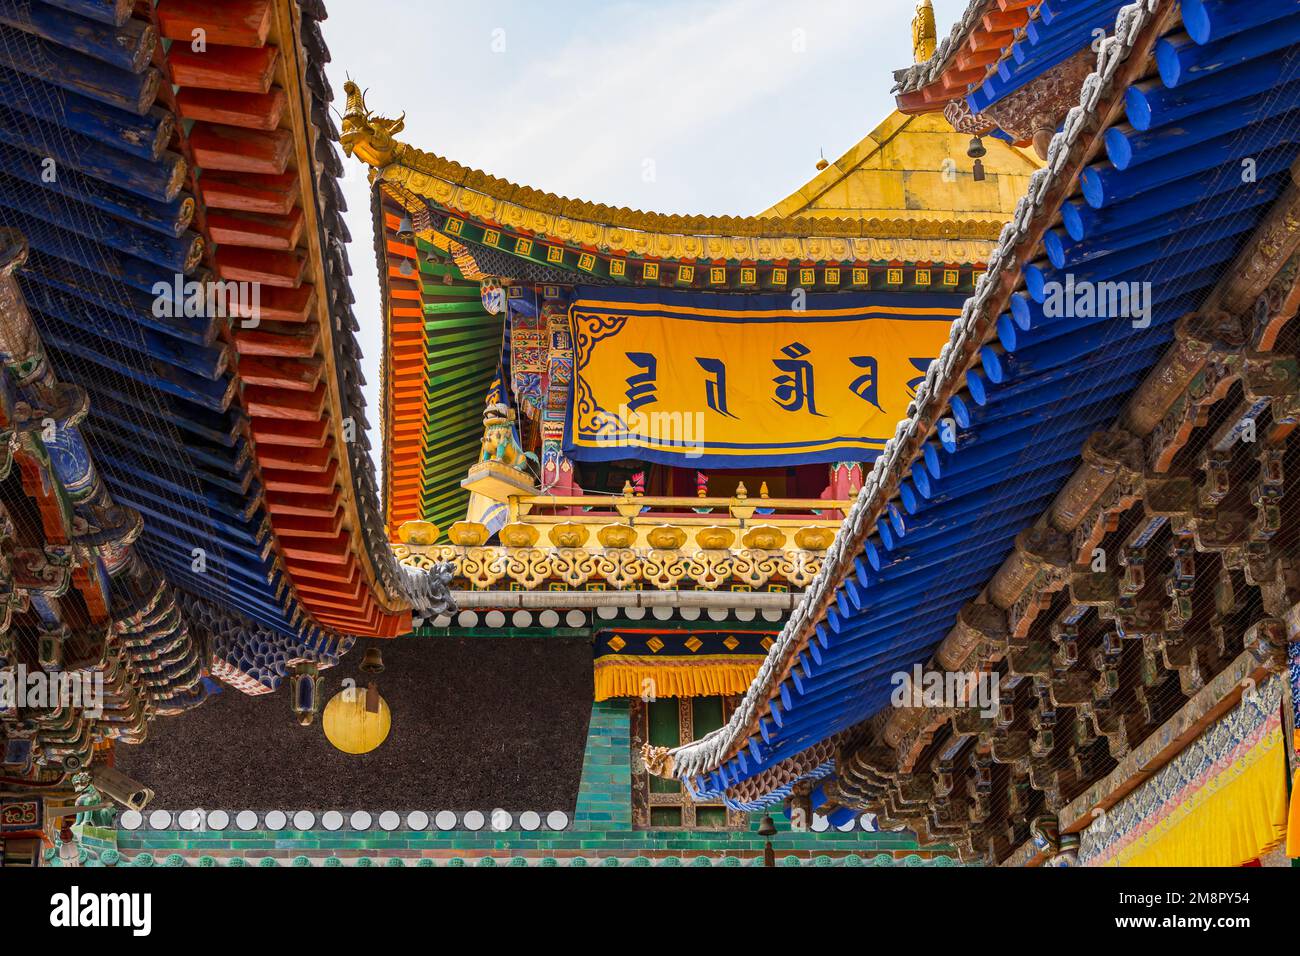 Colorful roofs with beams and ornaments and spectacular decorations at a temple in Kumbum Jampaling Monastery, Xining, China Stock Photo